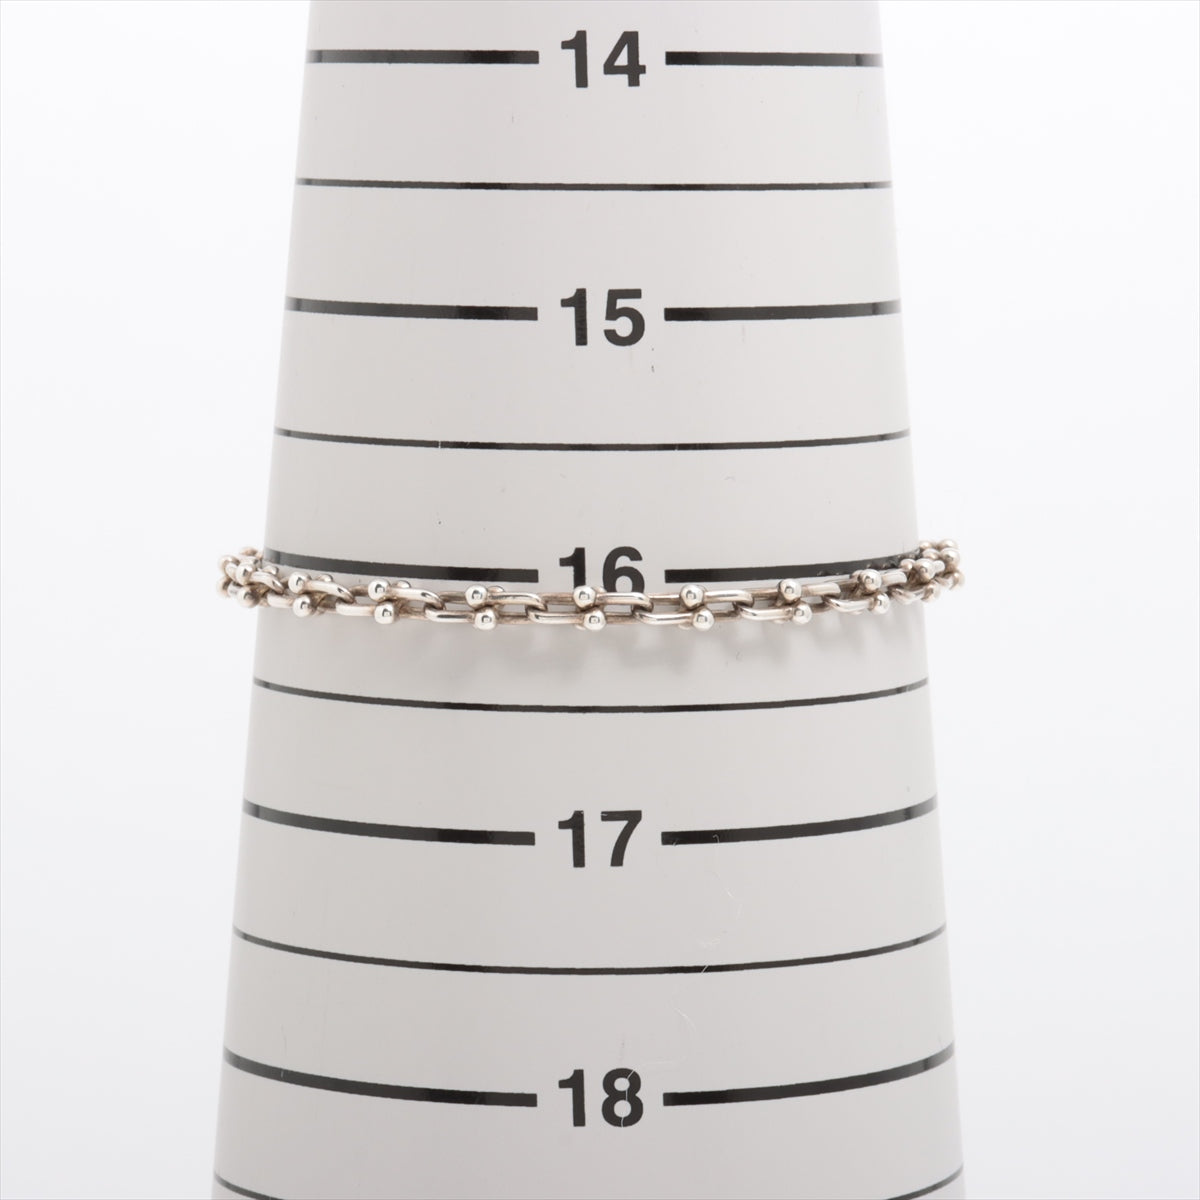 Tiffany Hardware Micro Link Bracelet 925 6.5g Silver Rubbing scratches Losing luster Stained